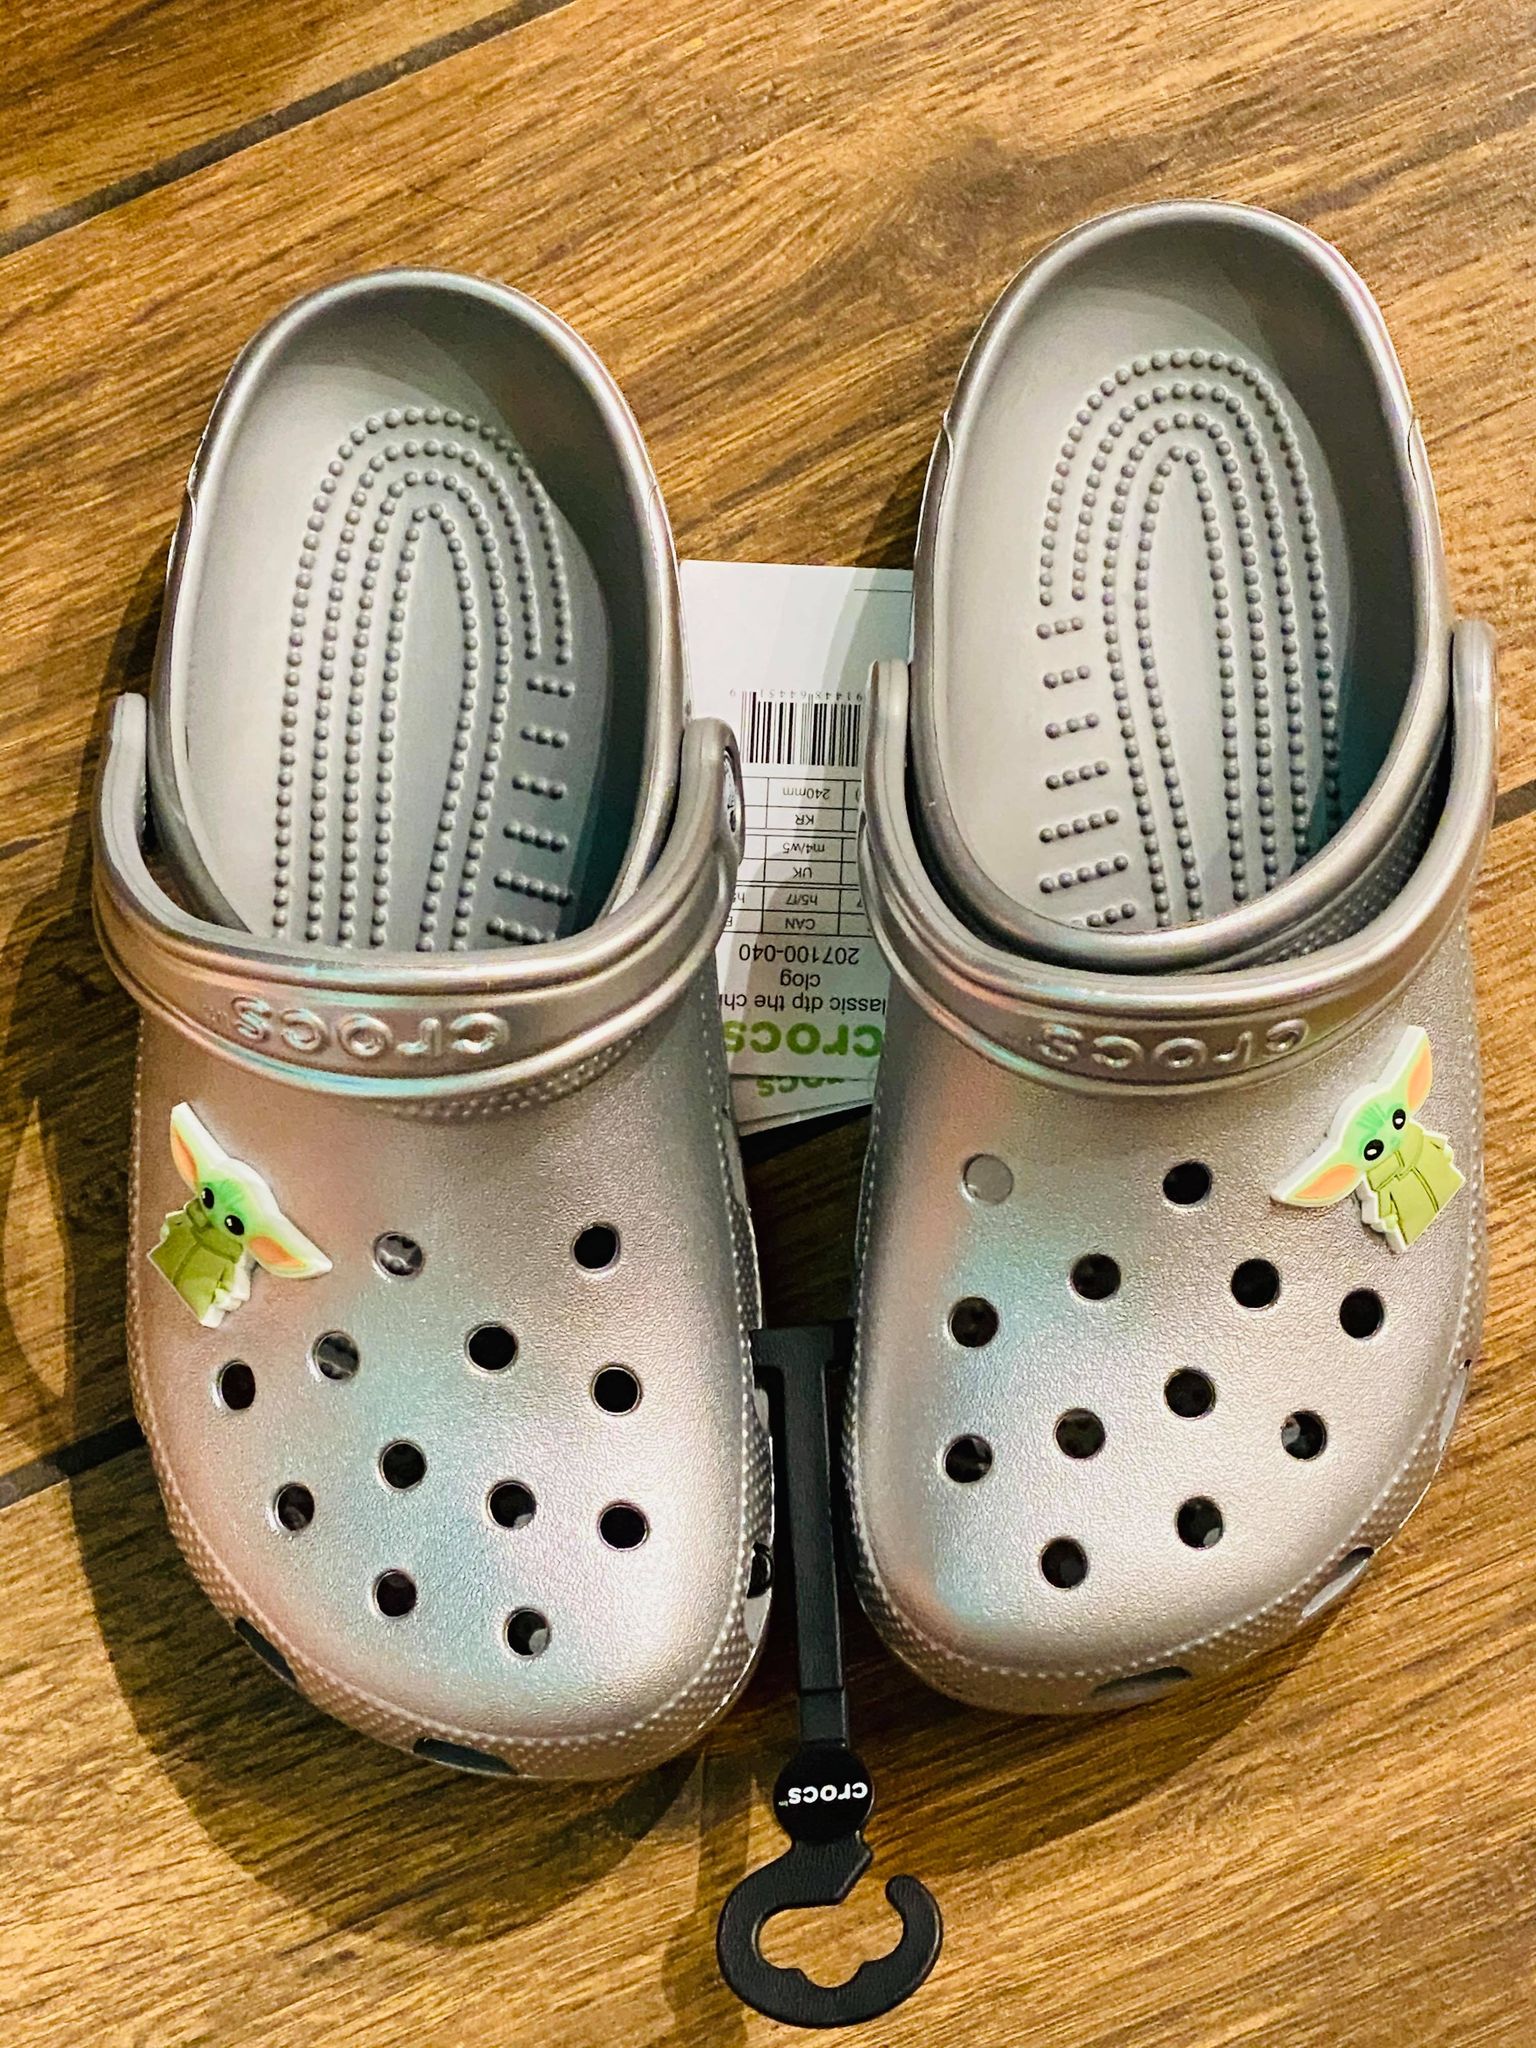 These New Baby Yoda Crocs are the Cutest Shoes in the Galaxy - PHOTOS ...